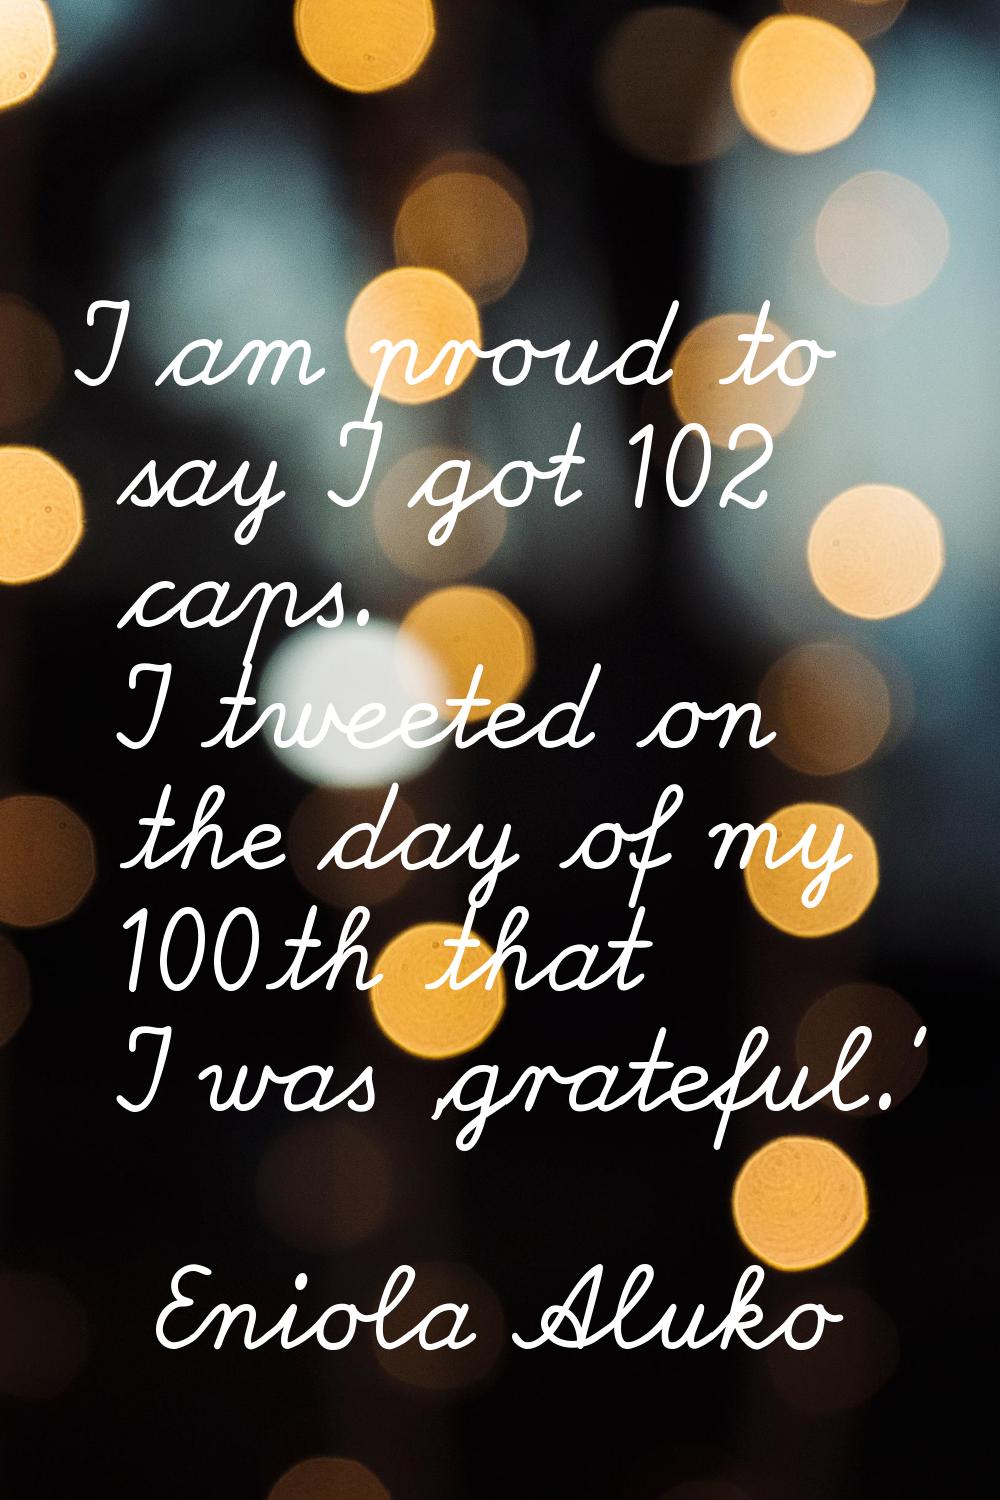 I am proud to say I got 102 caps. I tweeted on the day of my 100th that I was 'grateful.'